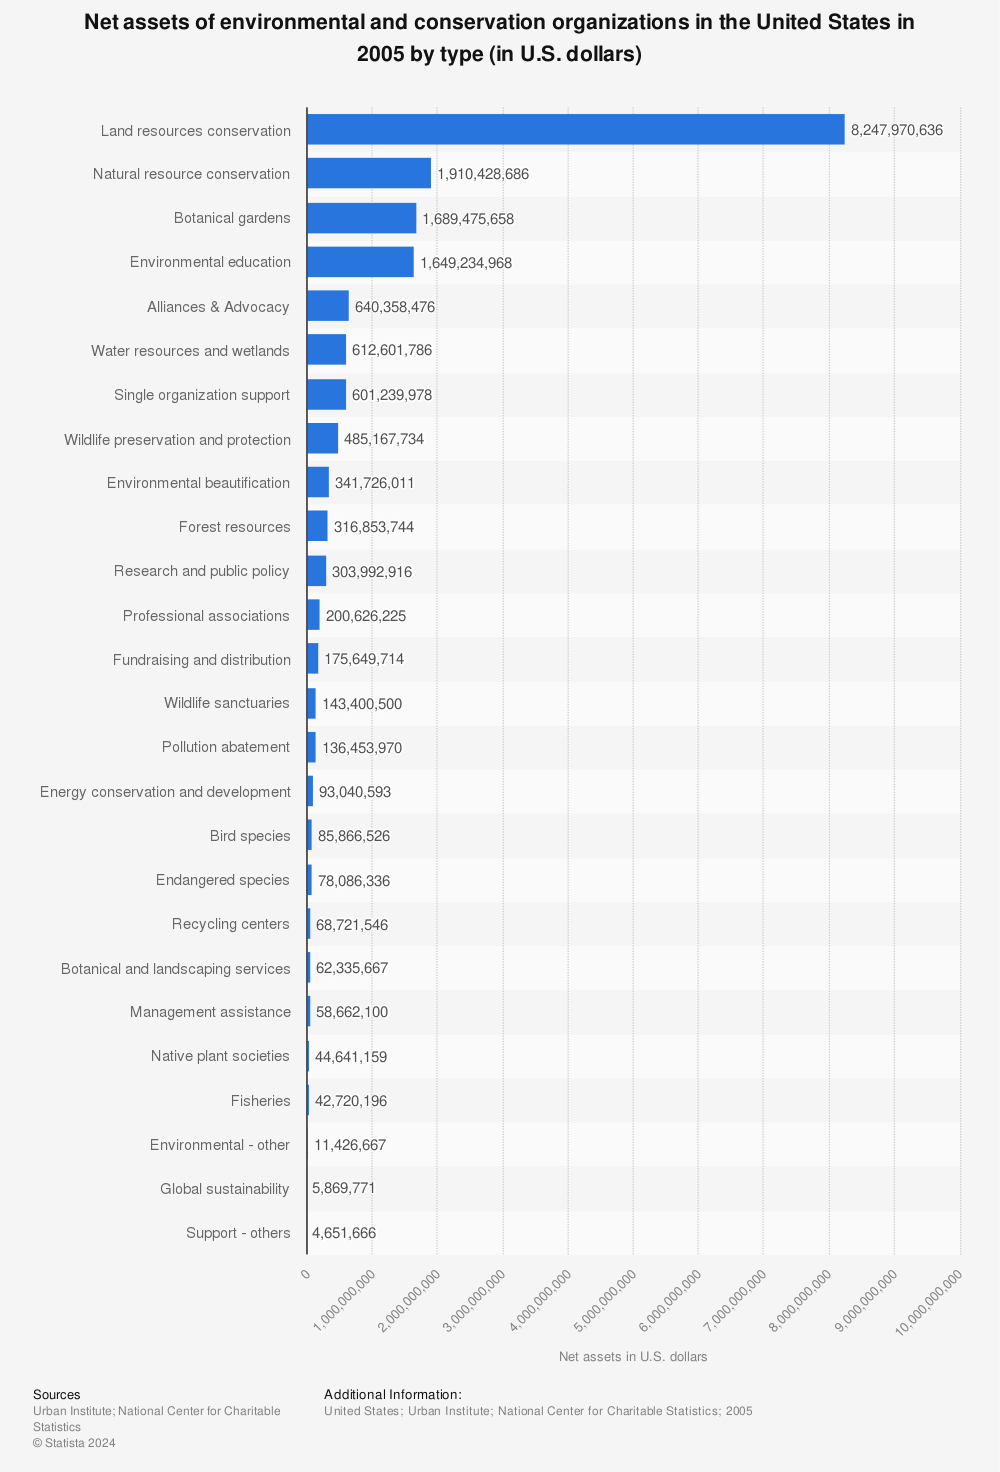 Statistic: Net assets of environmental and conservation organizations in the United States in 2005 by type (in U.S. dollars) | Statista